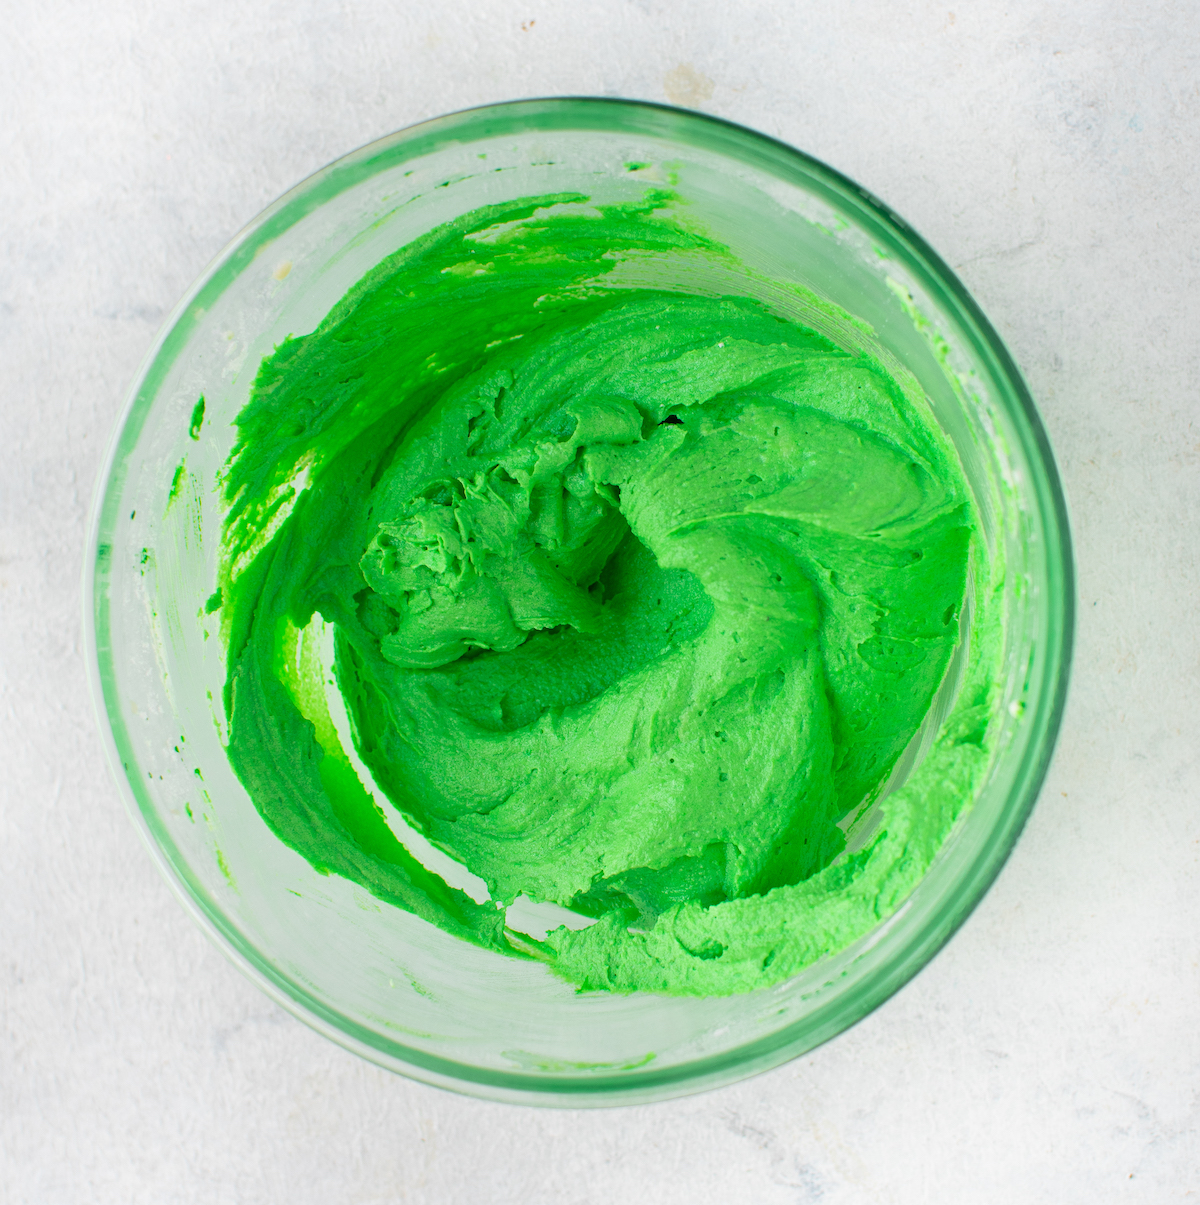 Mixed green icing in a clear glass bowl